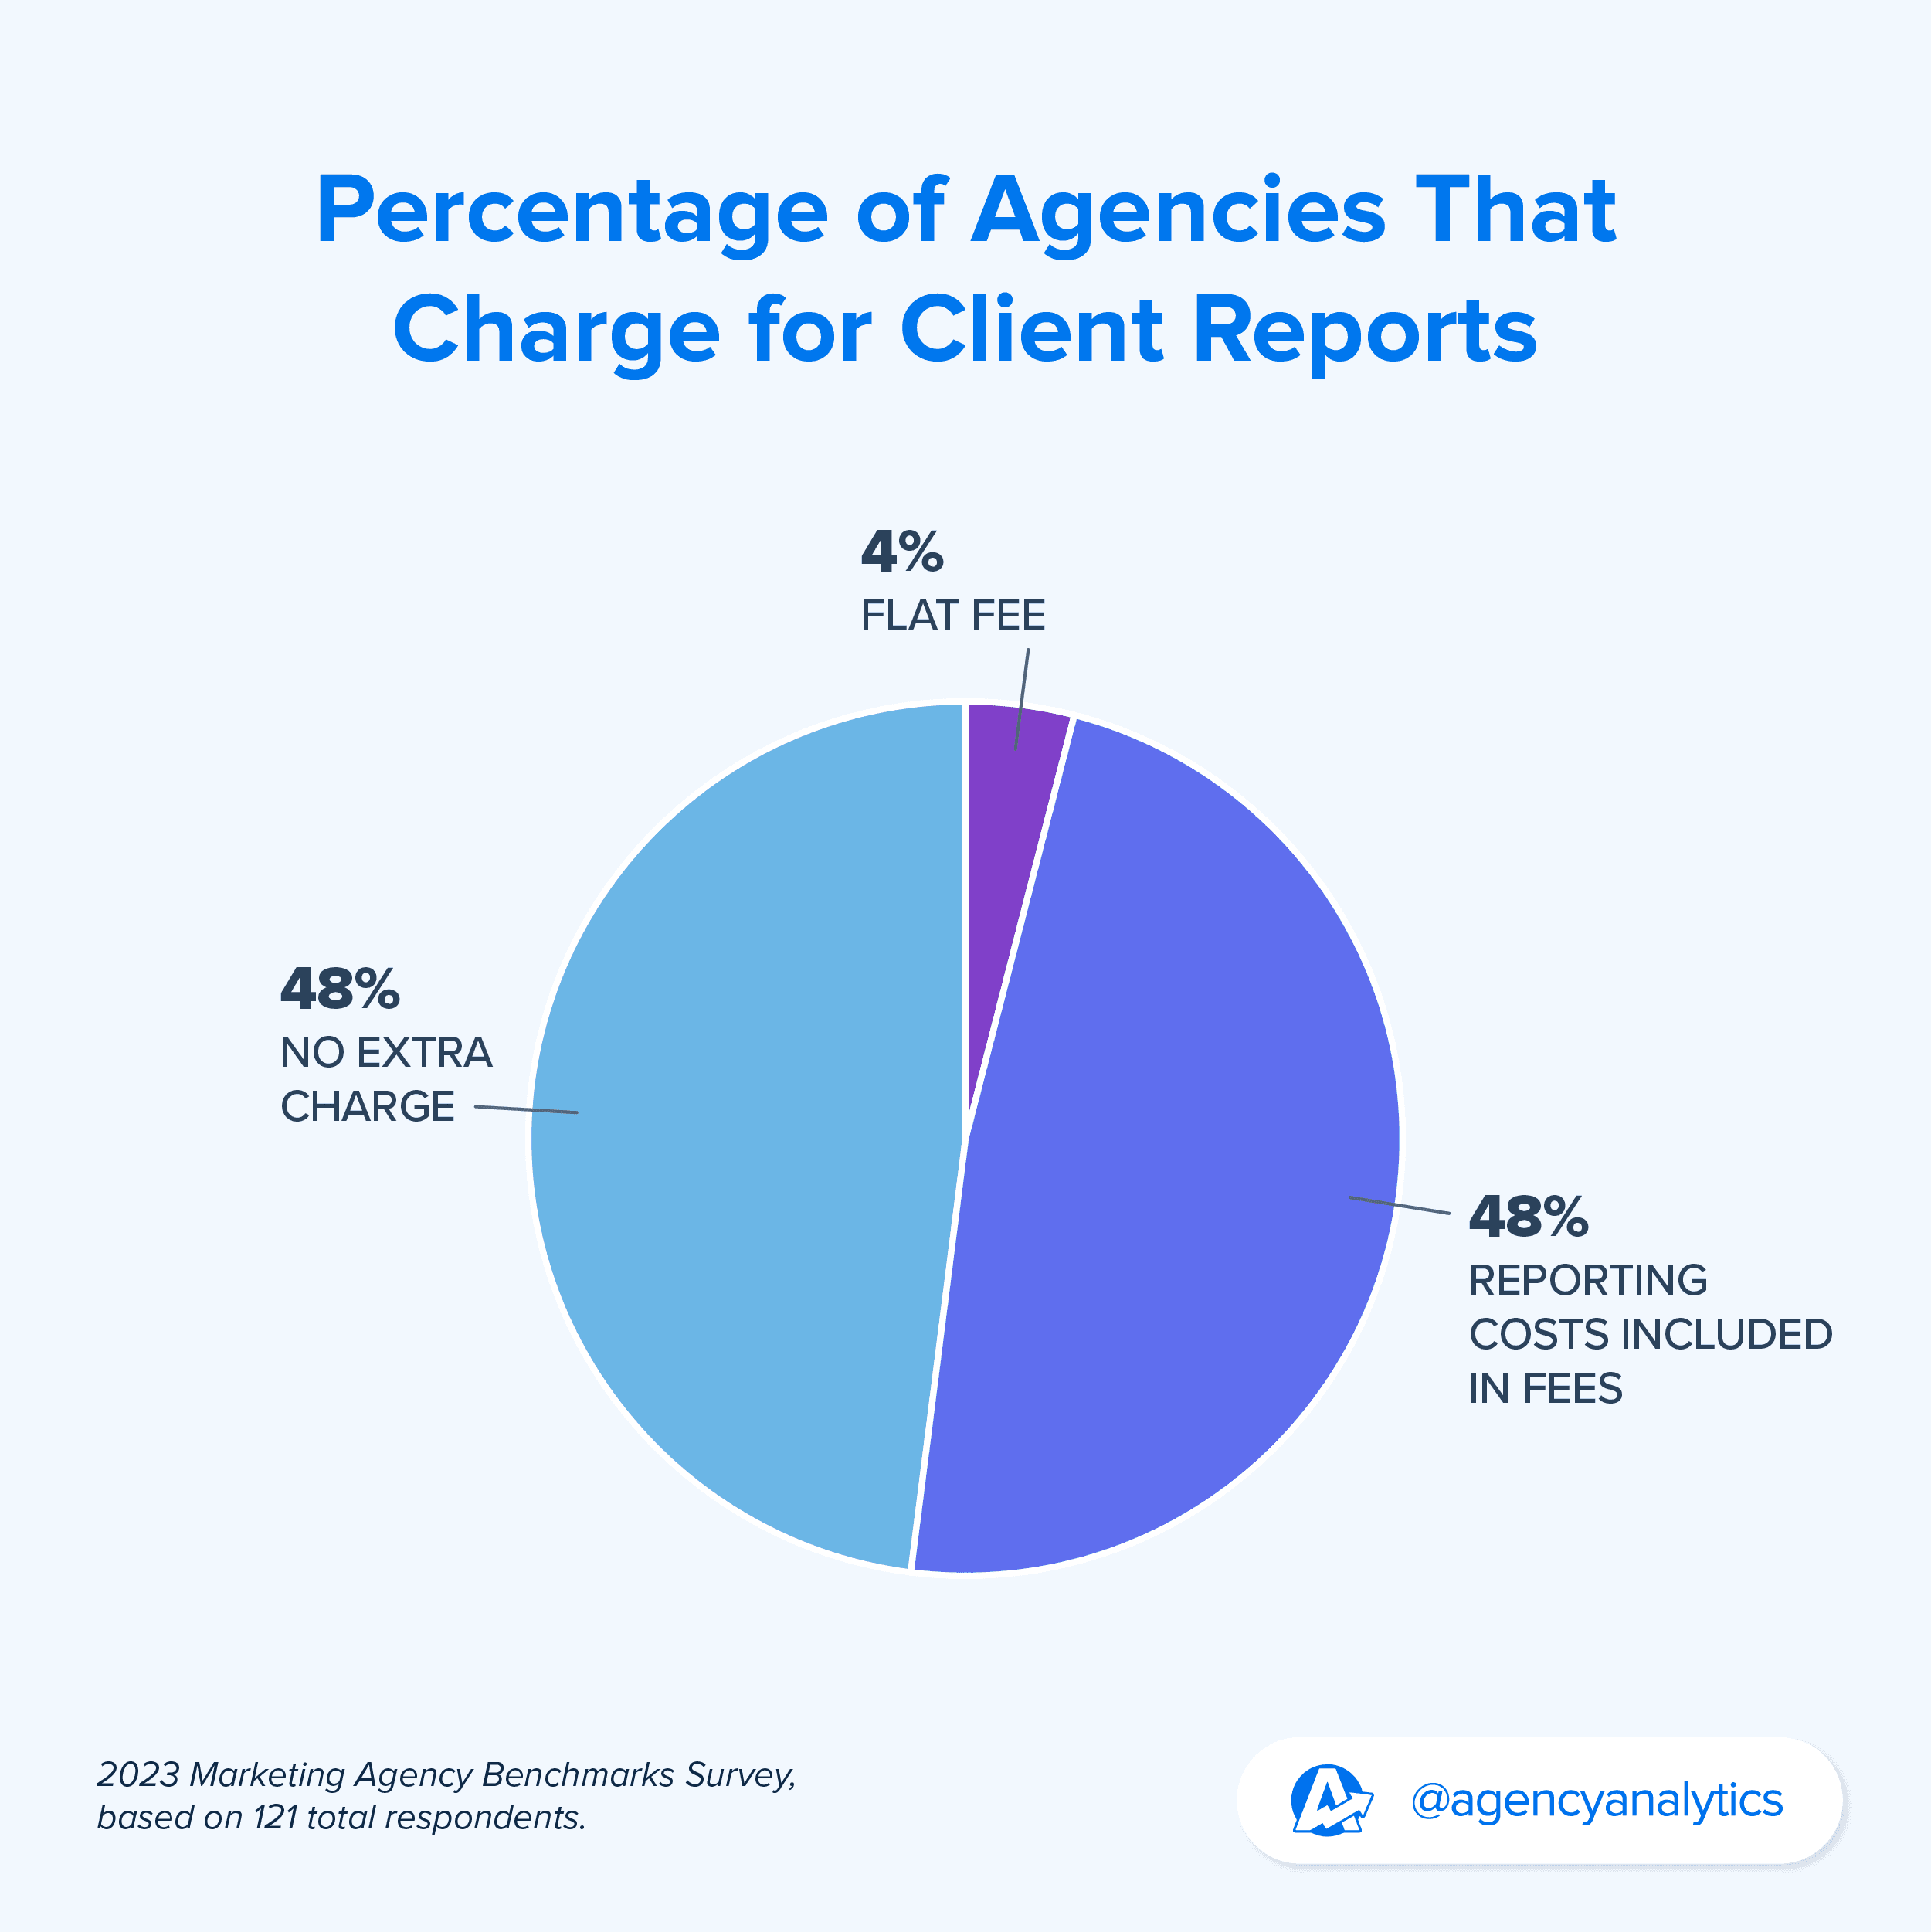 pie chart showing what percentage of agencies charge for client reports